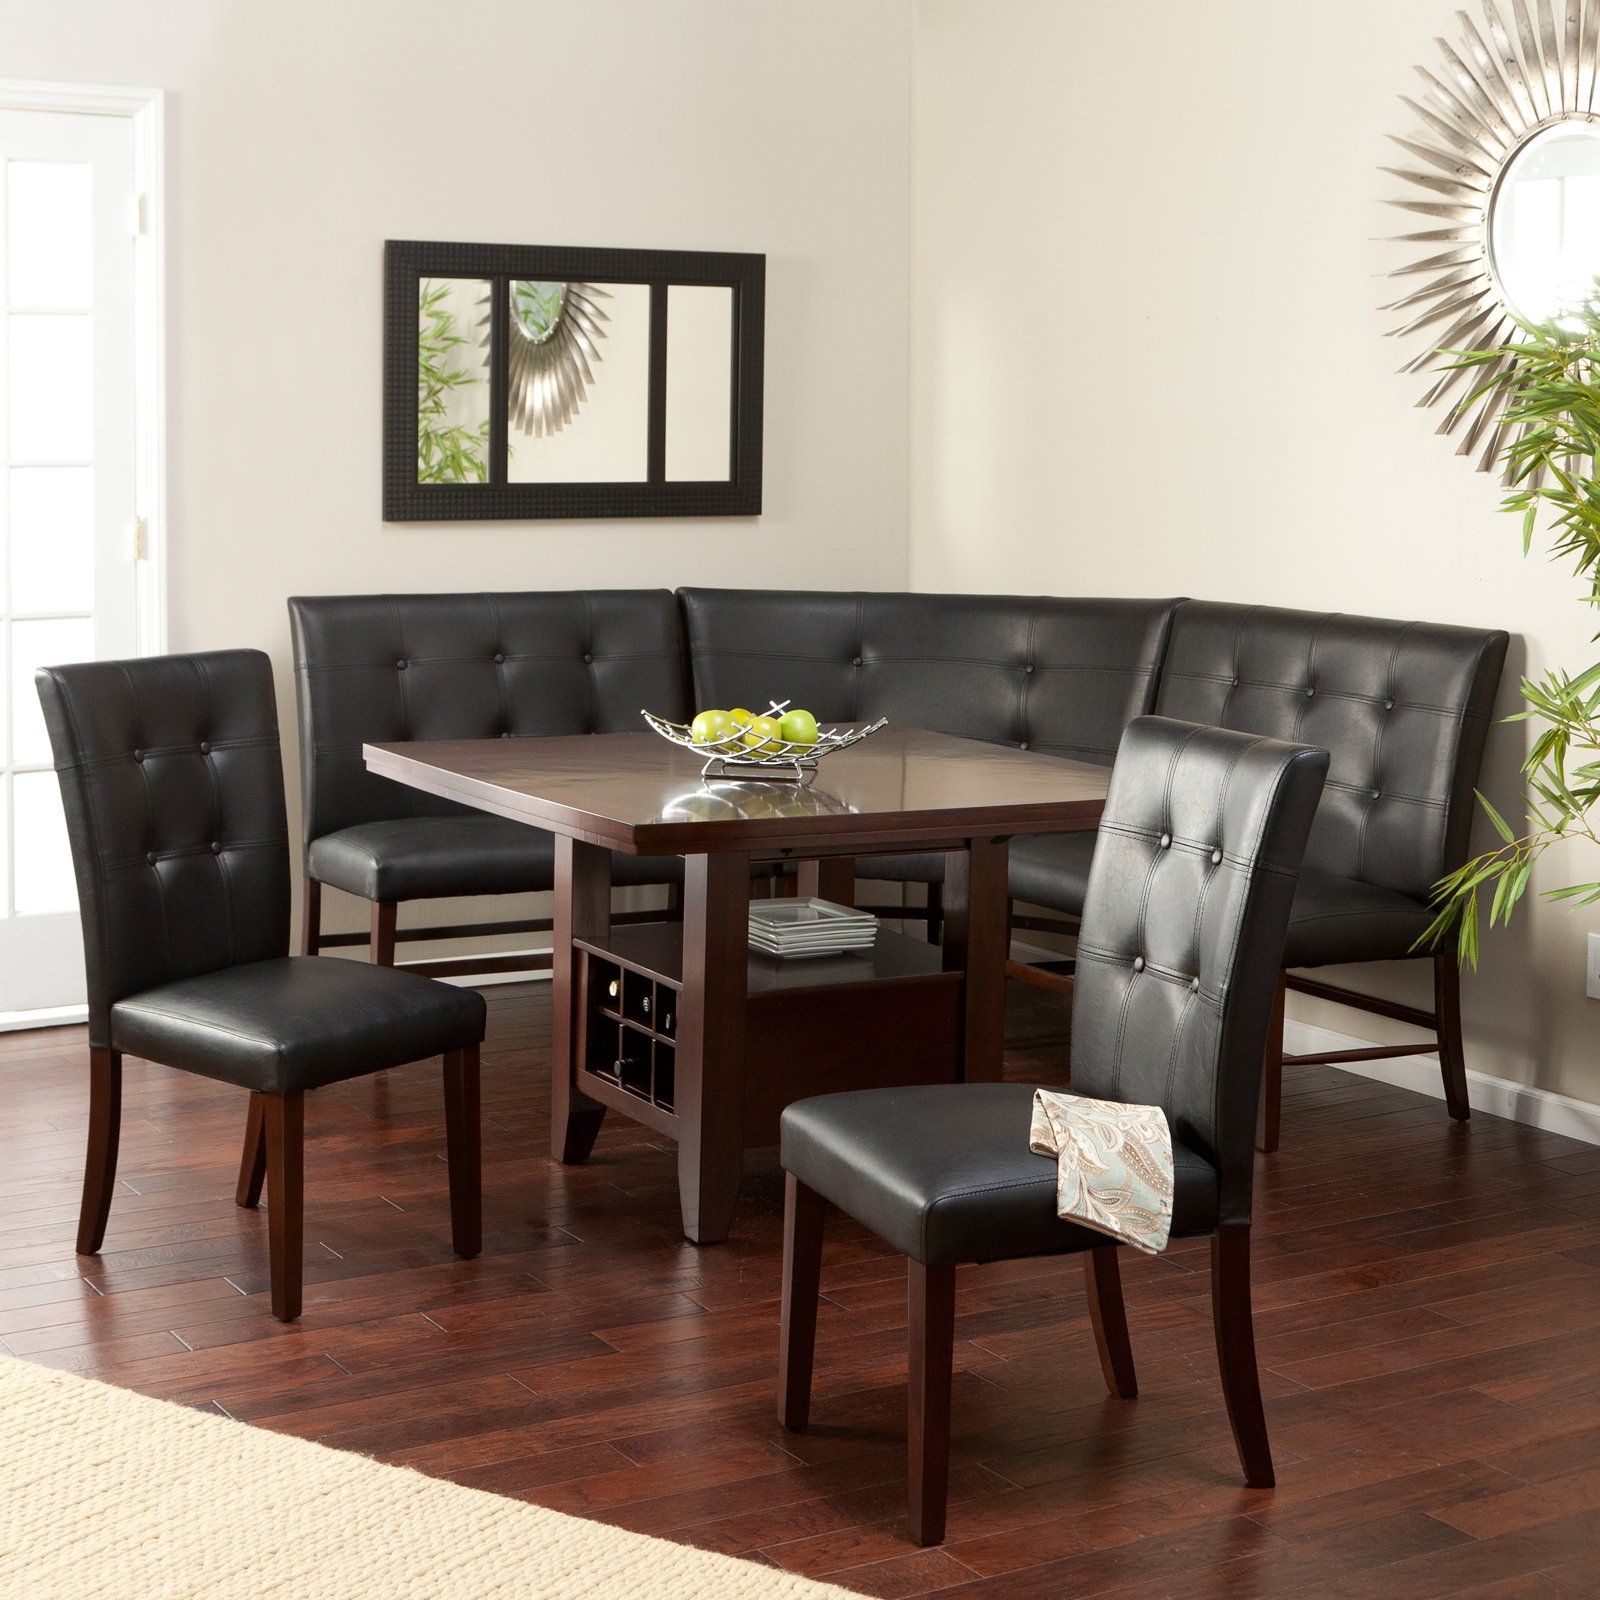 Most Recent Have To Have It. Layton Espresso 6 Piece Breakfast Nook Set Intended For Medium Elegant Dining Tables (Photo 8 of 25)